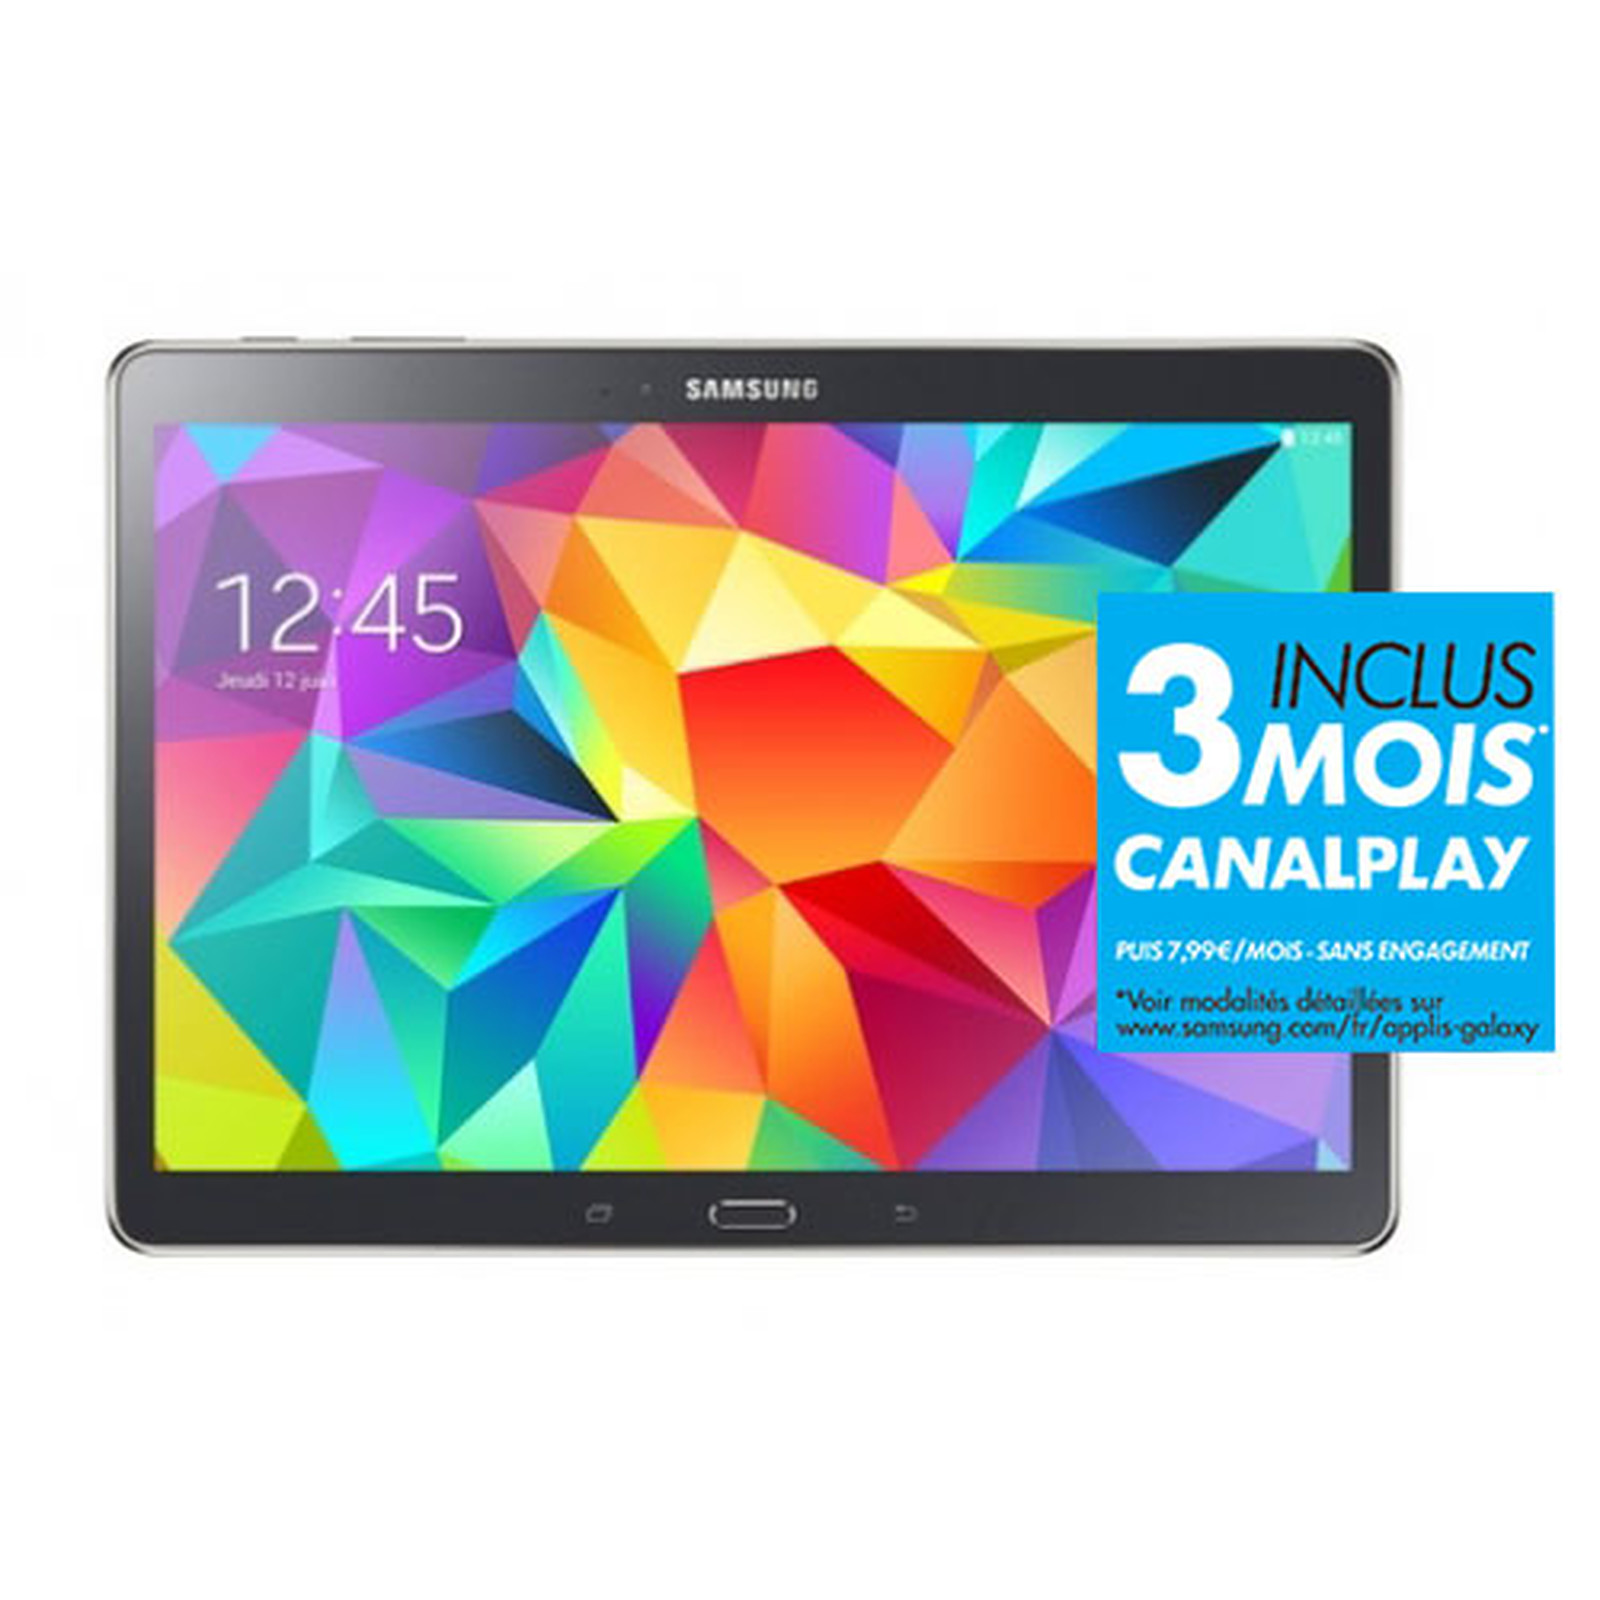 Samsung Galaxy Tab S 10.5" SM-T800 16 Go Carbone · Reconditionne - Tablette tactile Samsung